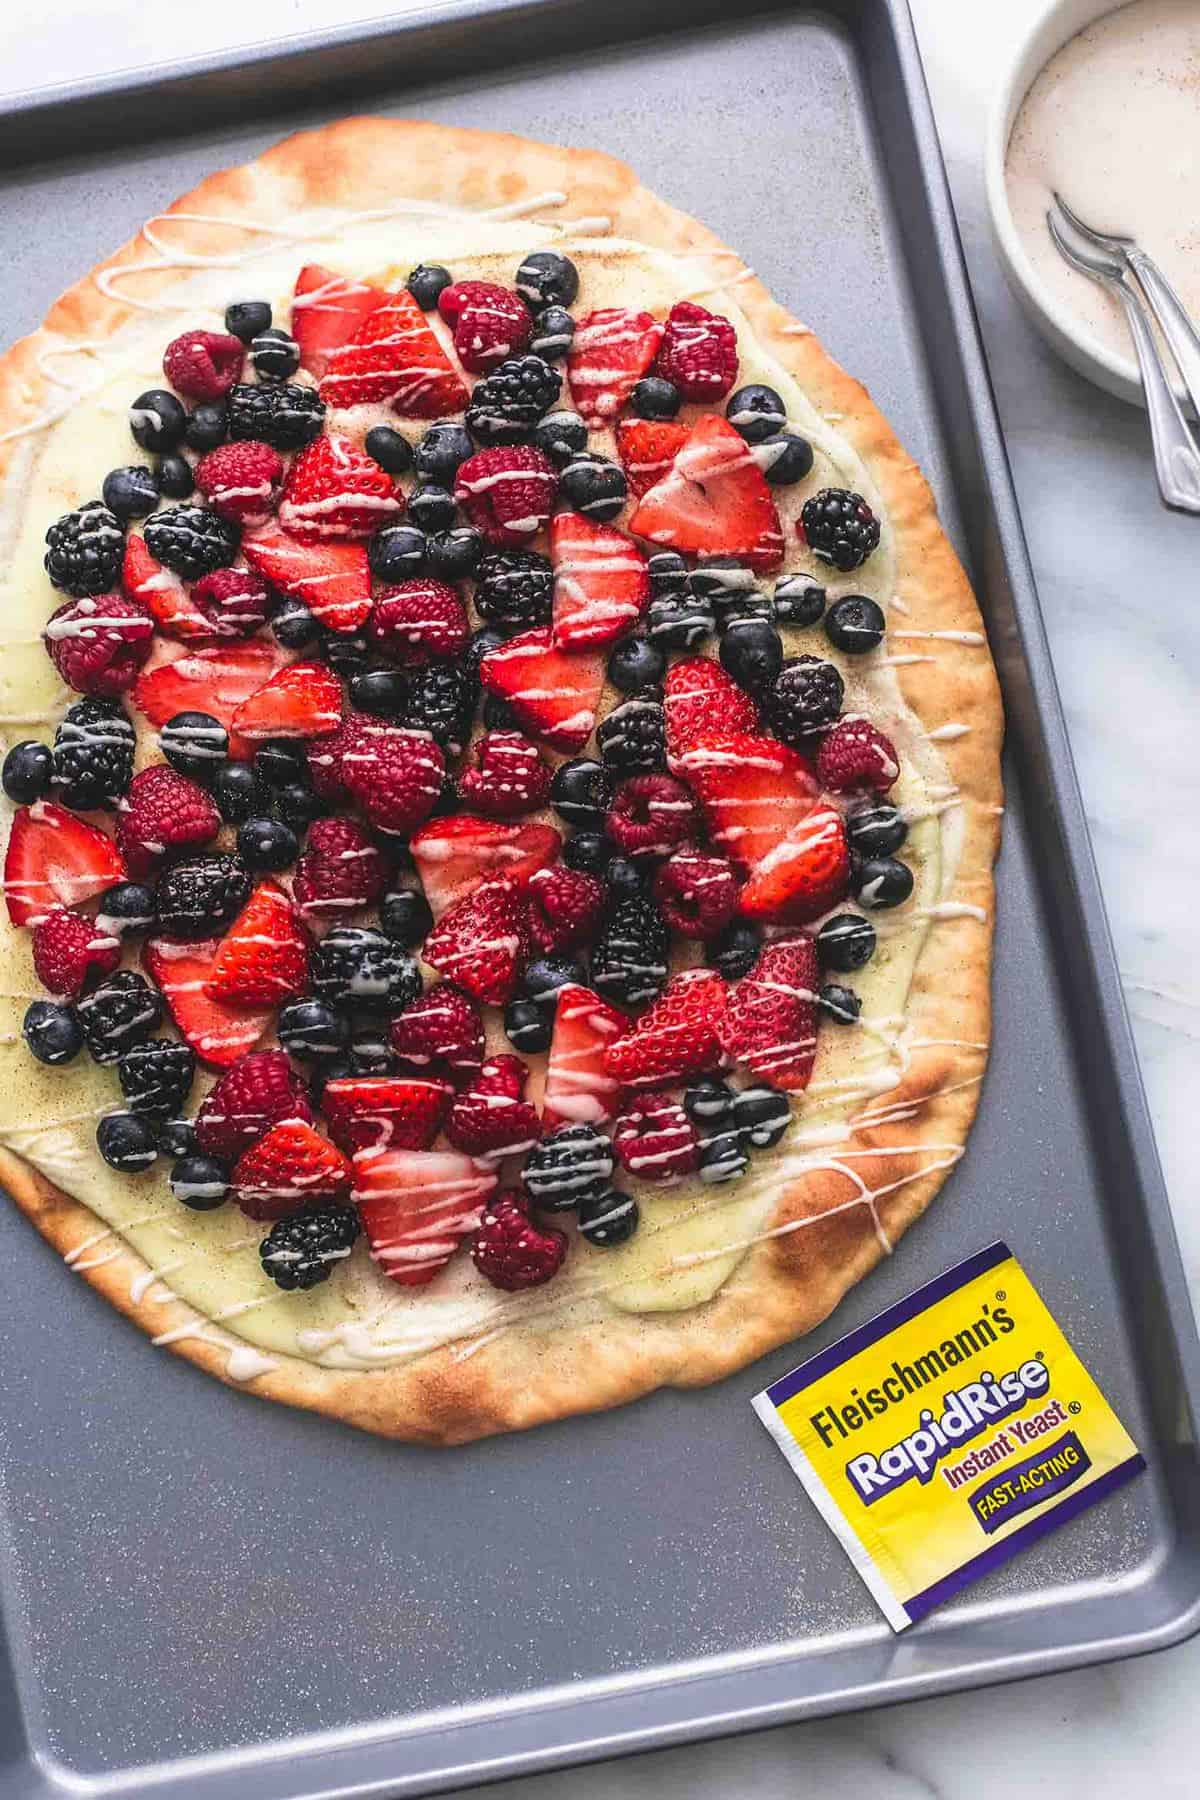 top view of mixed berry pizza with vanilla glaze and a package of RapidRise yeast on a baking sheet with a bowl of glaze on the side.